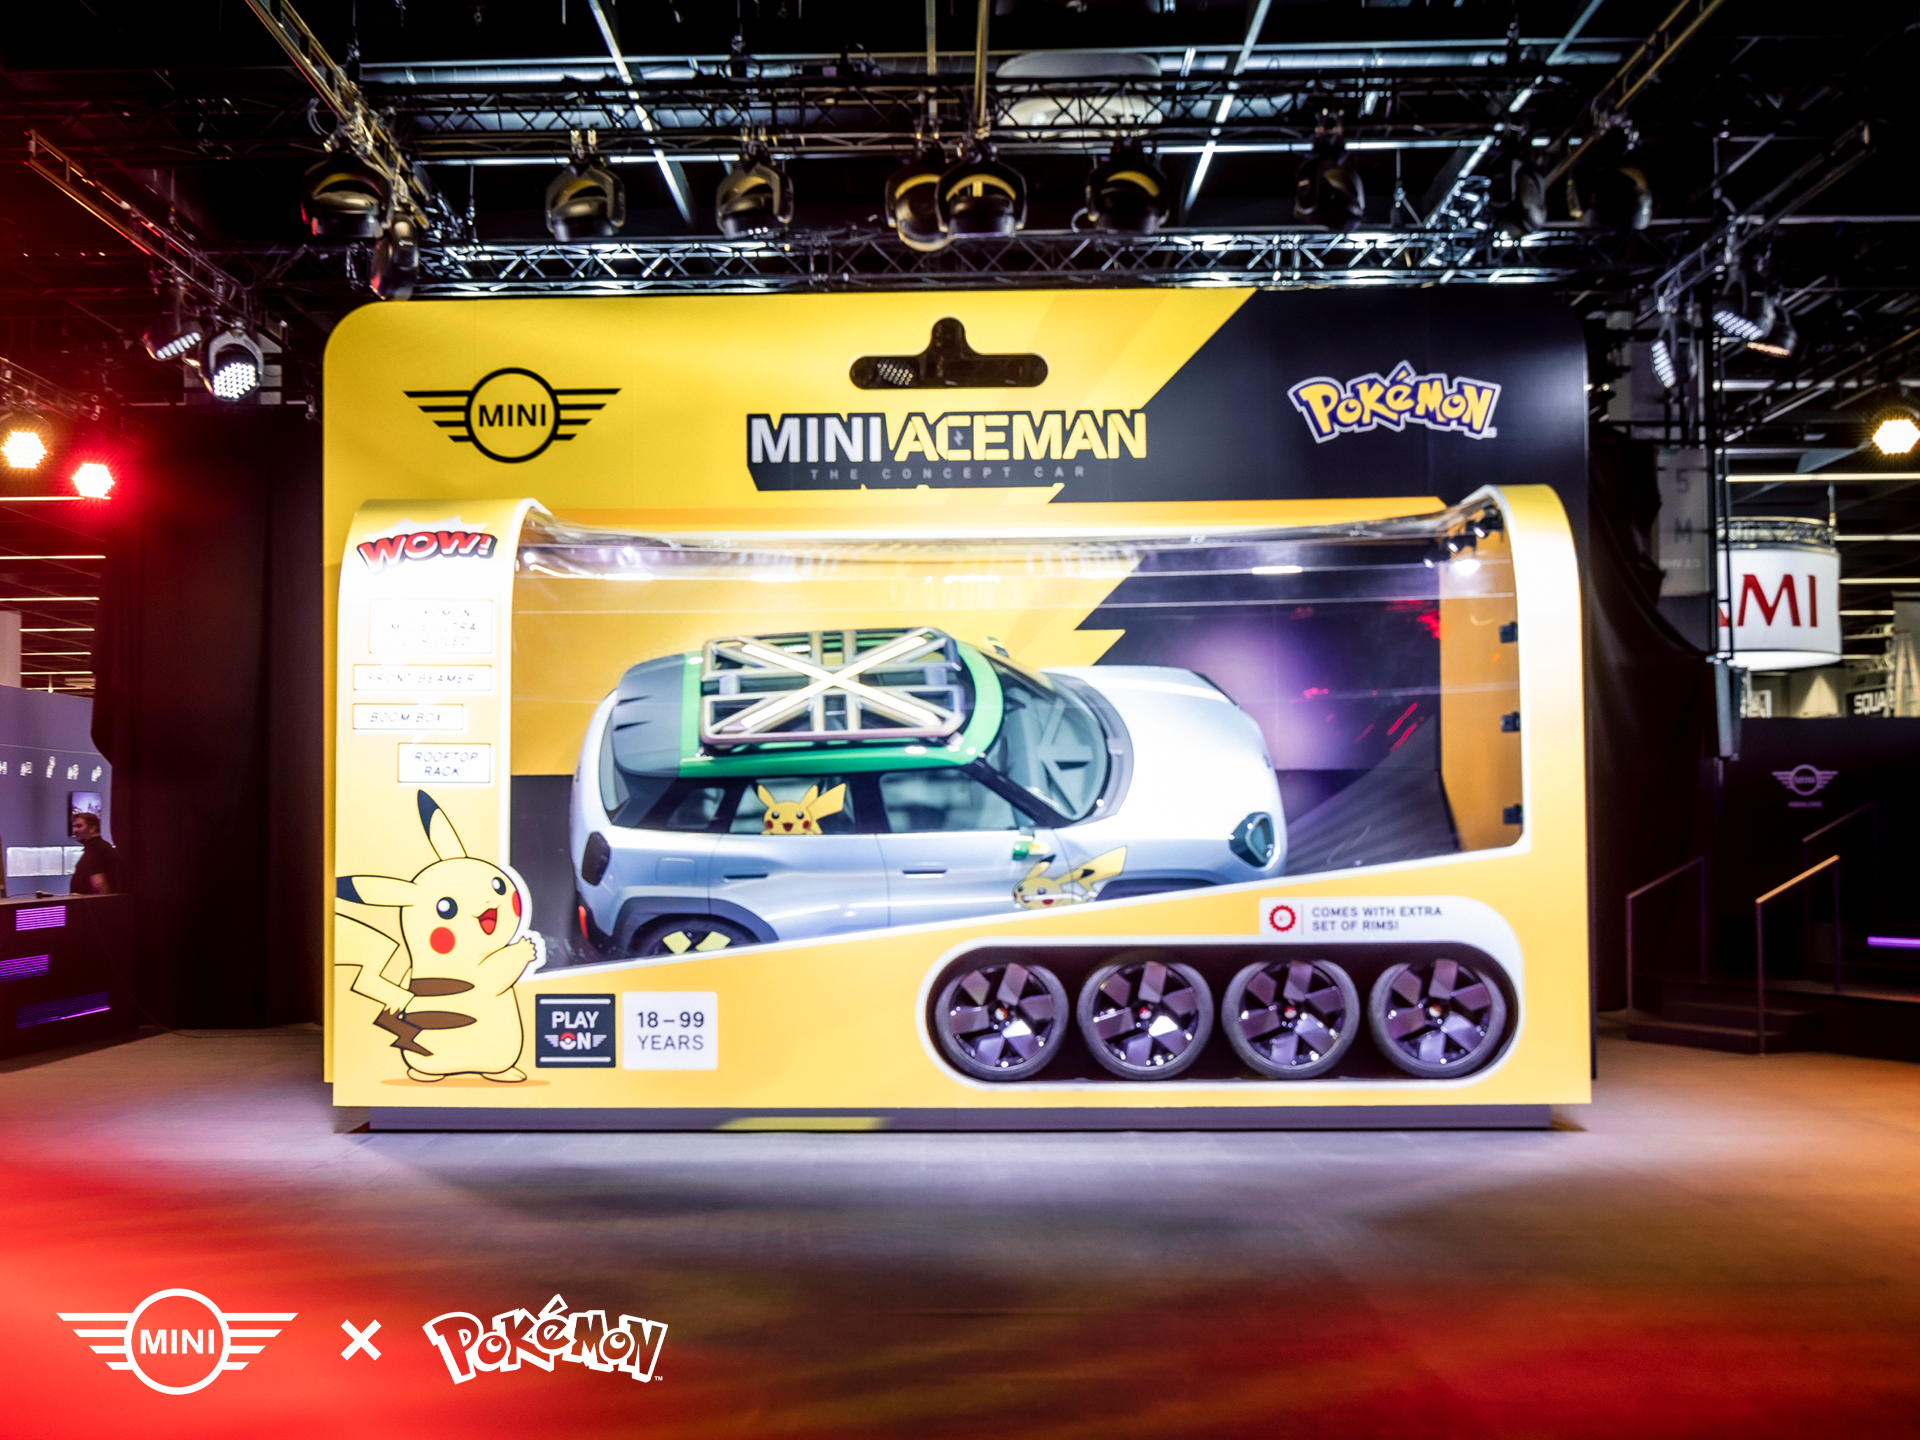 Image of the concept car Aceman by Pokémon and MINI at gamescom 2022 in life-size packaging.